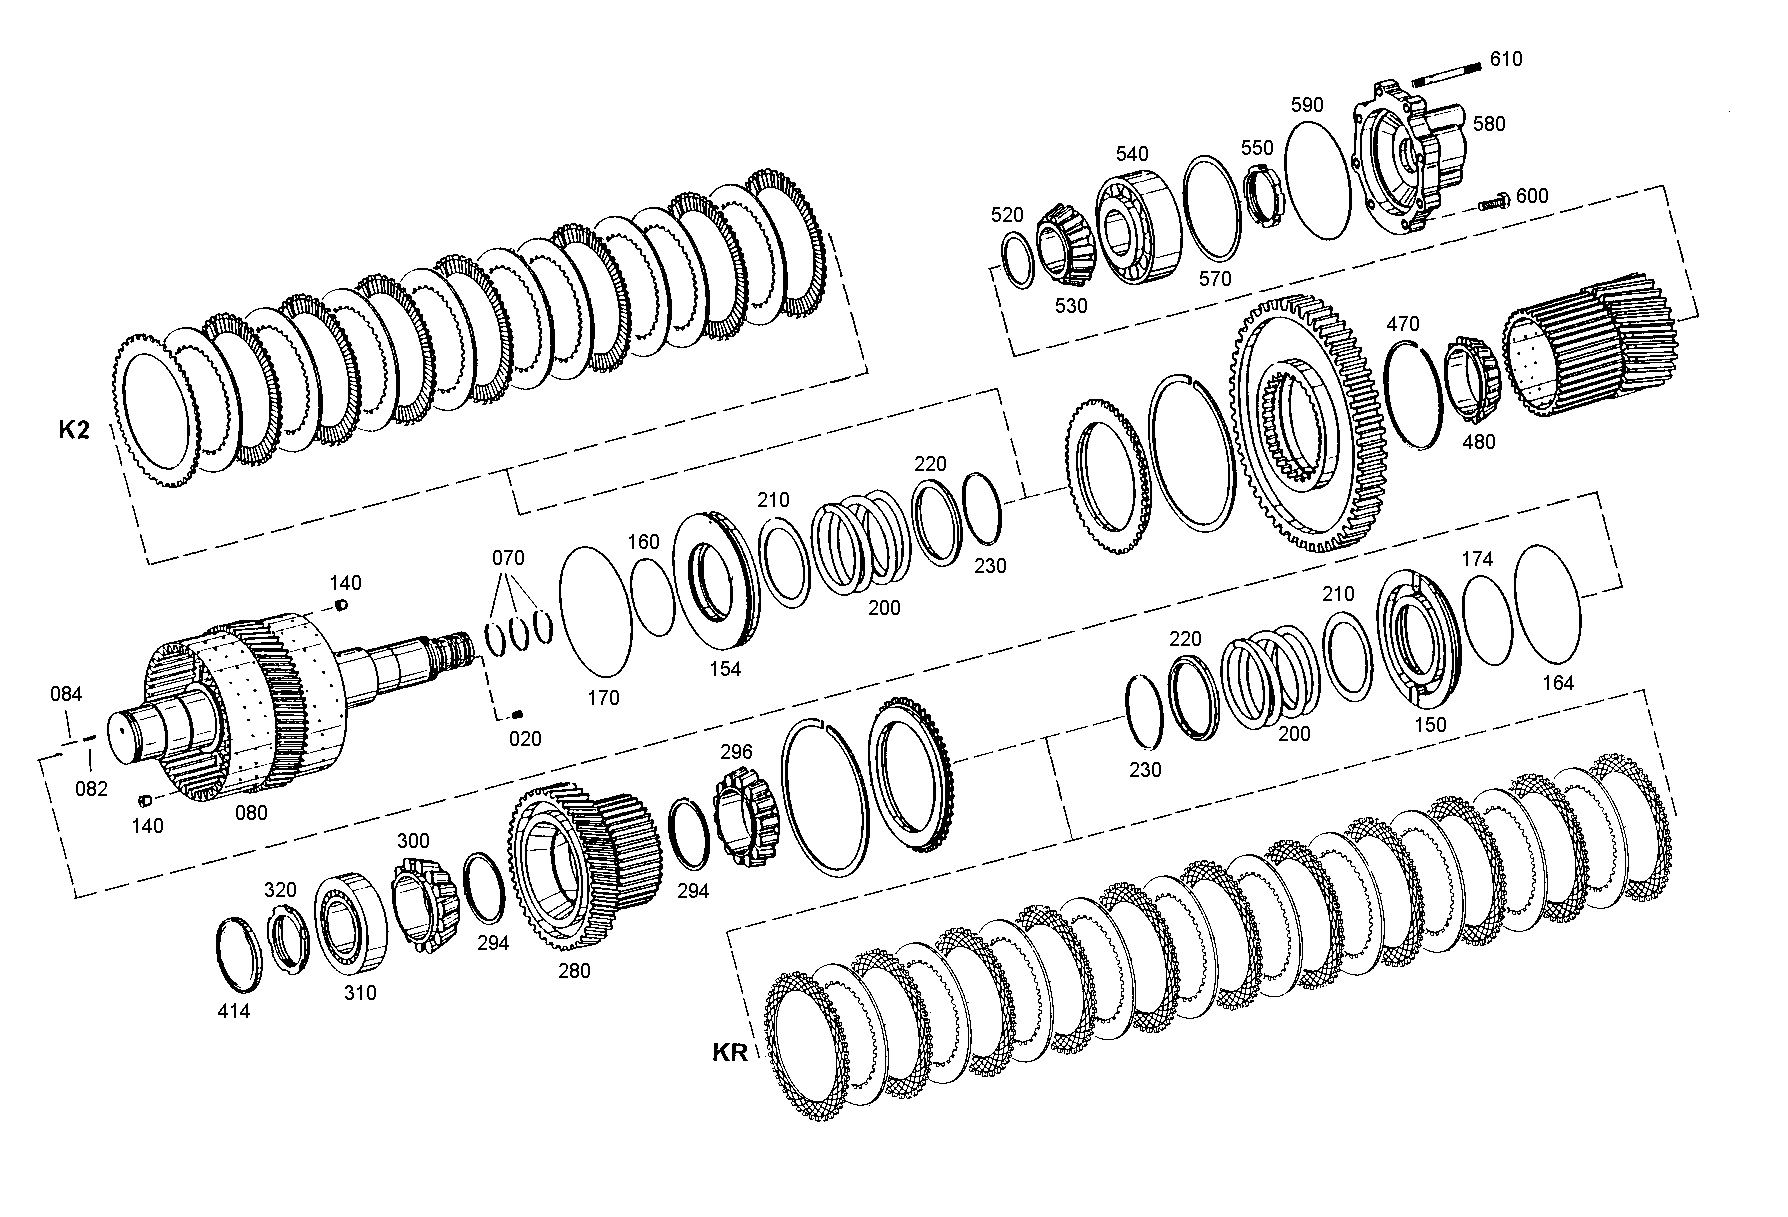 drawing for BUSINESS SOLUTIONS / DIV.GESCO 100236A1 - WASHER (figure 3)